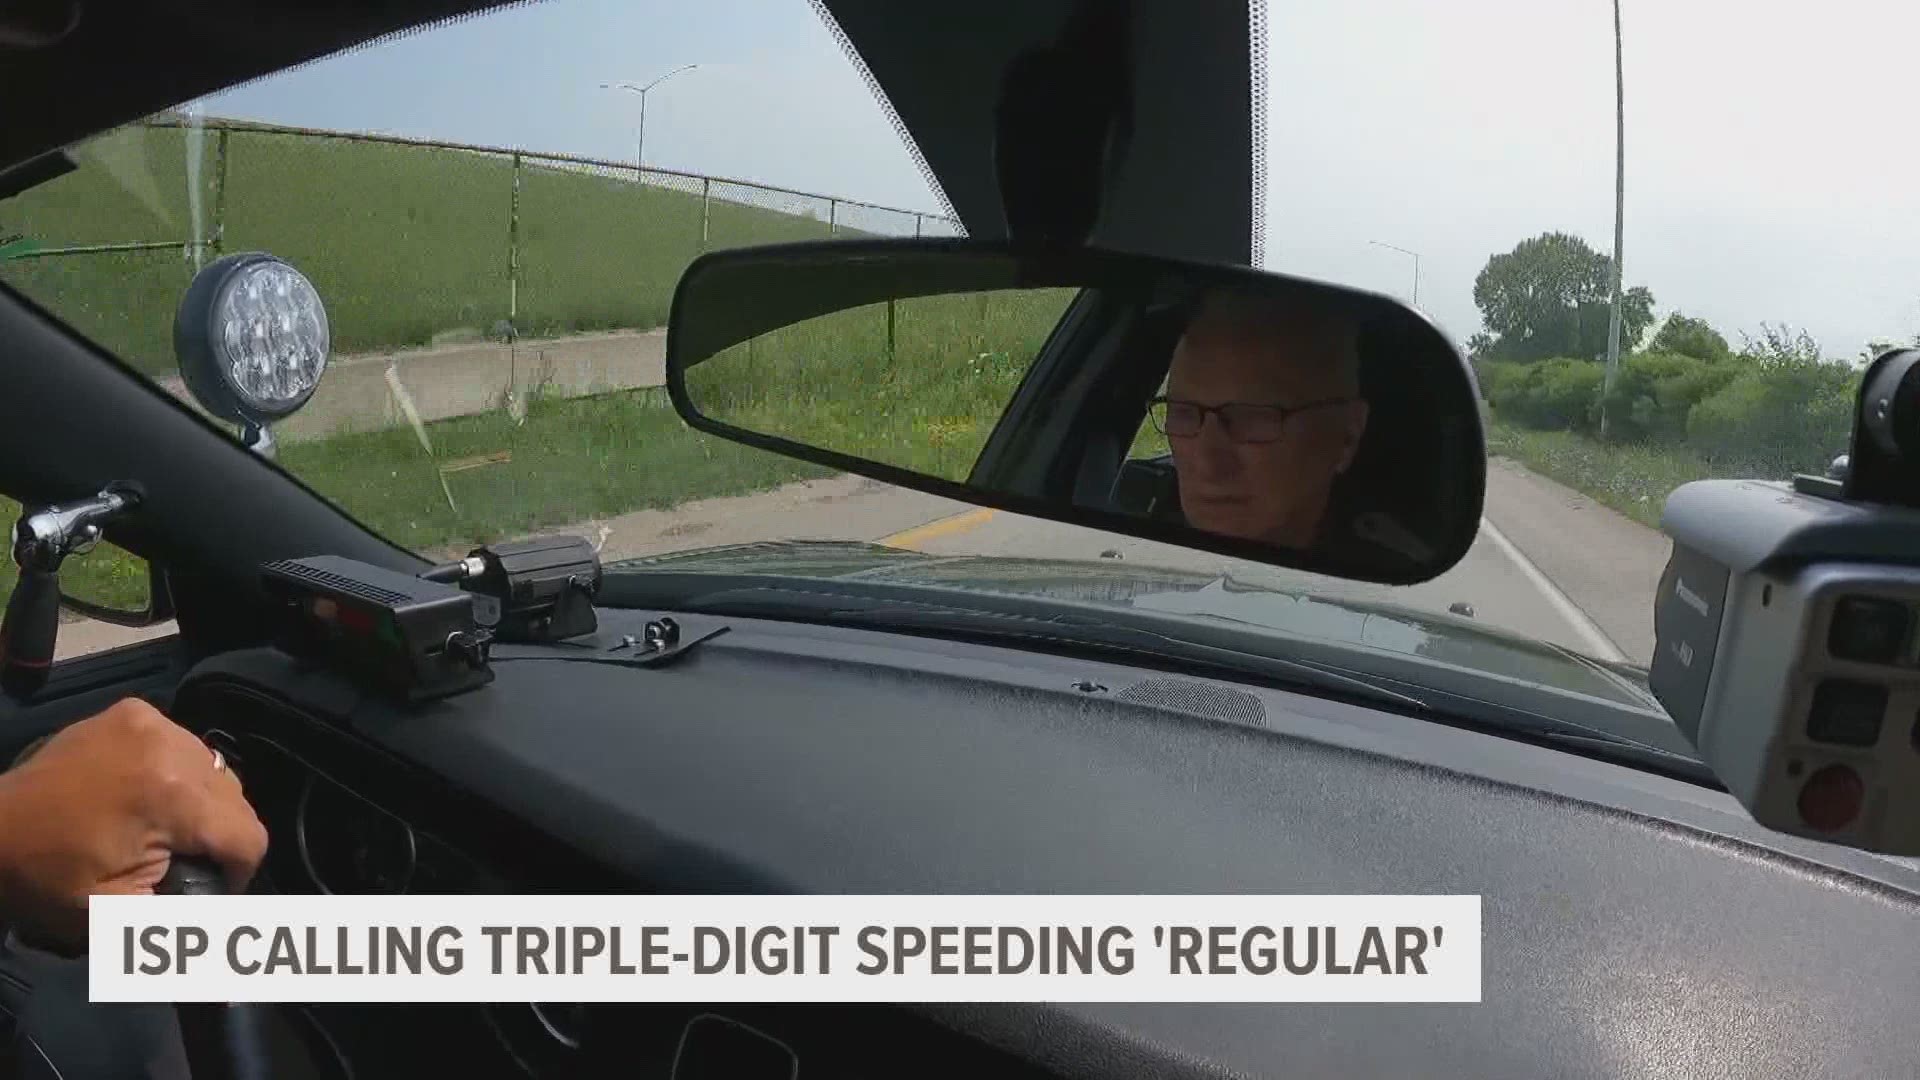 "We are seeing people at 130 and 140 miles an hour out there," said Sgt. Alex Dinkla with the Iowa State Patrol.